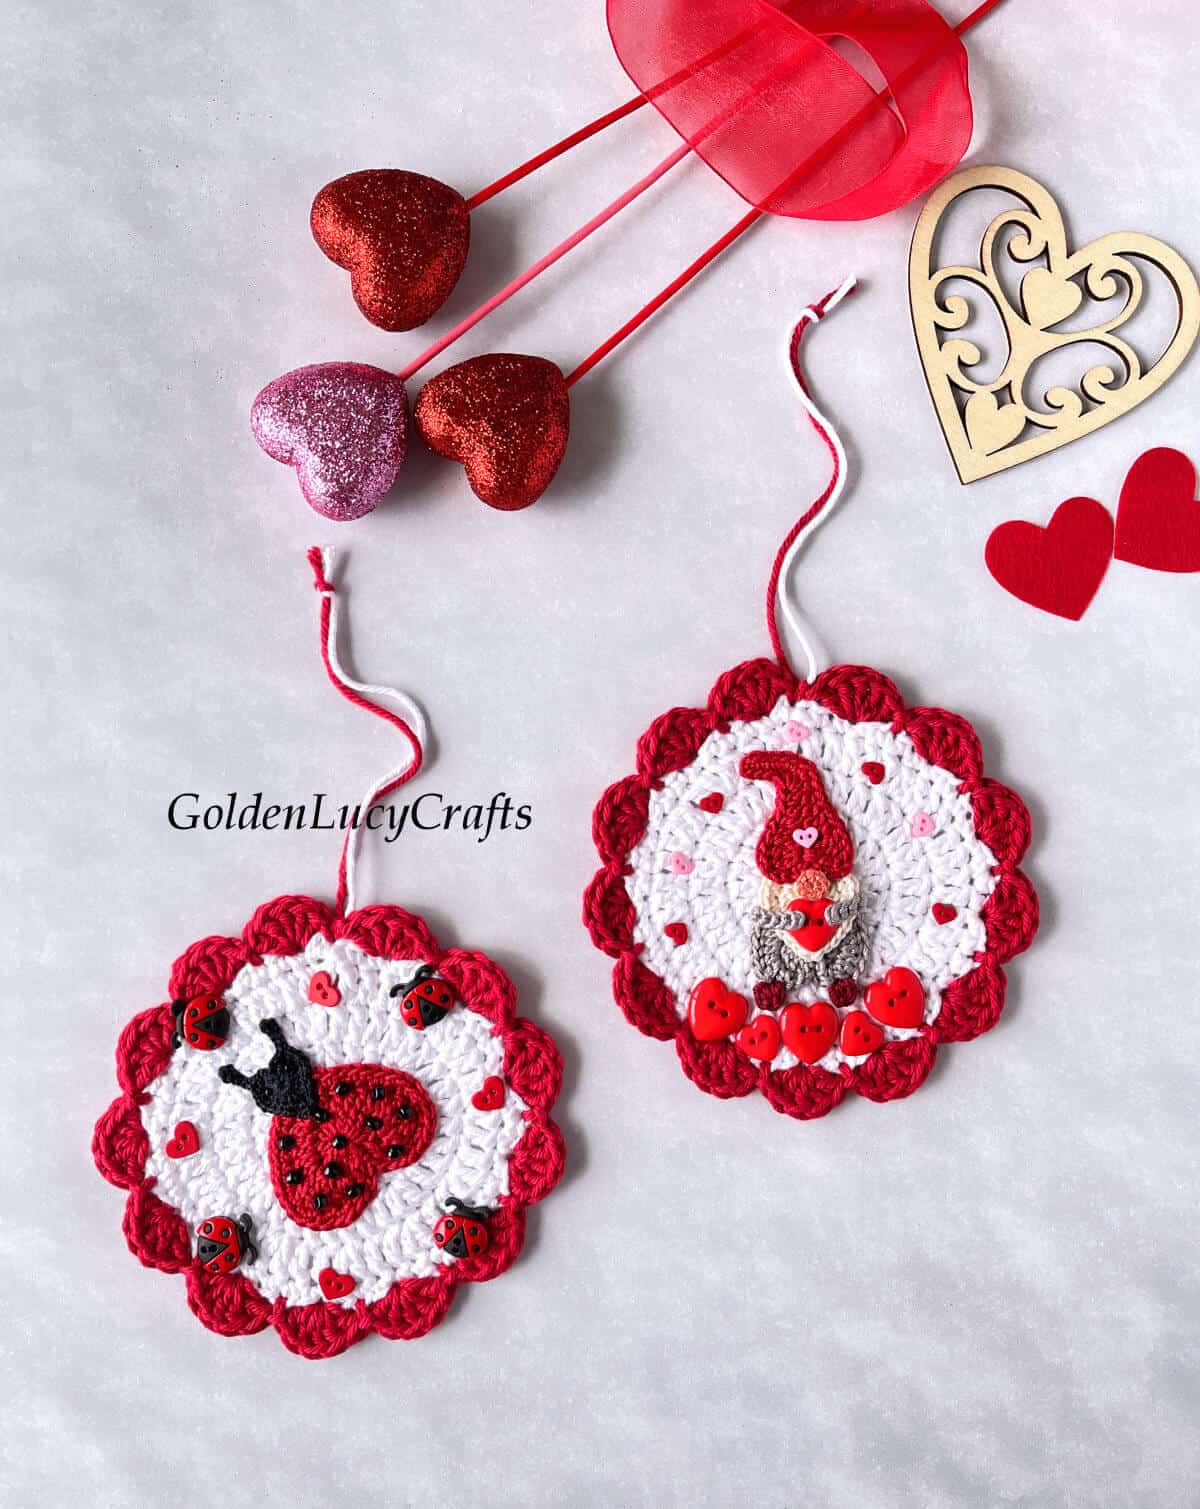 Two crocheted ornaments for Valentine's Day.